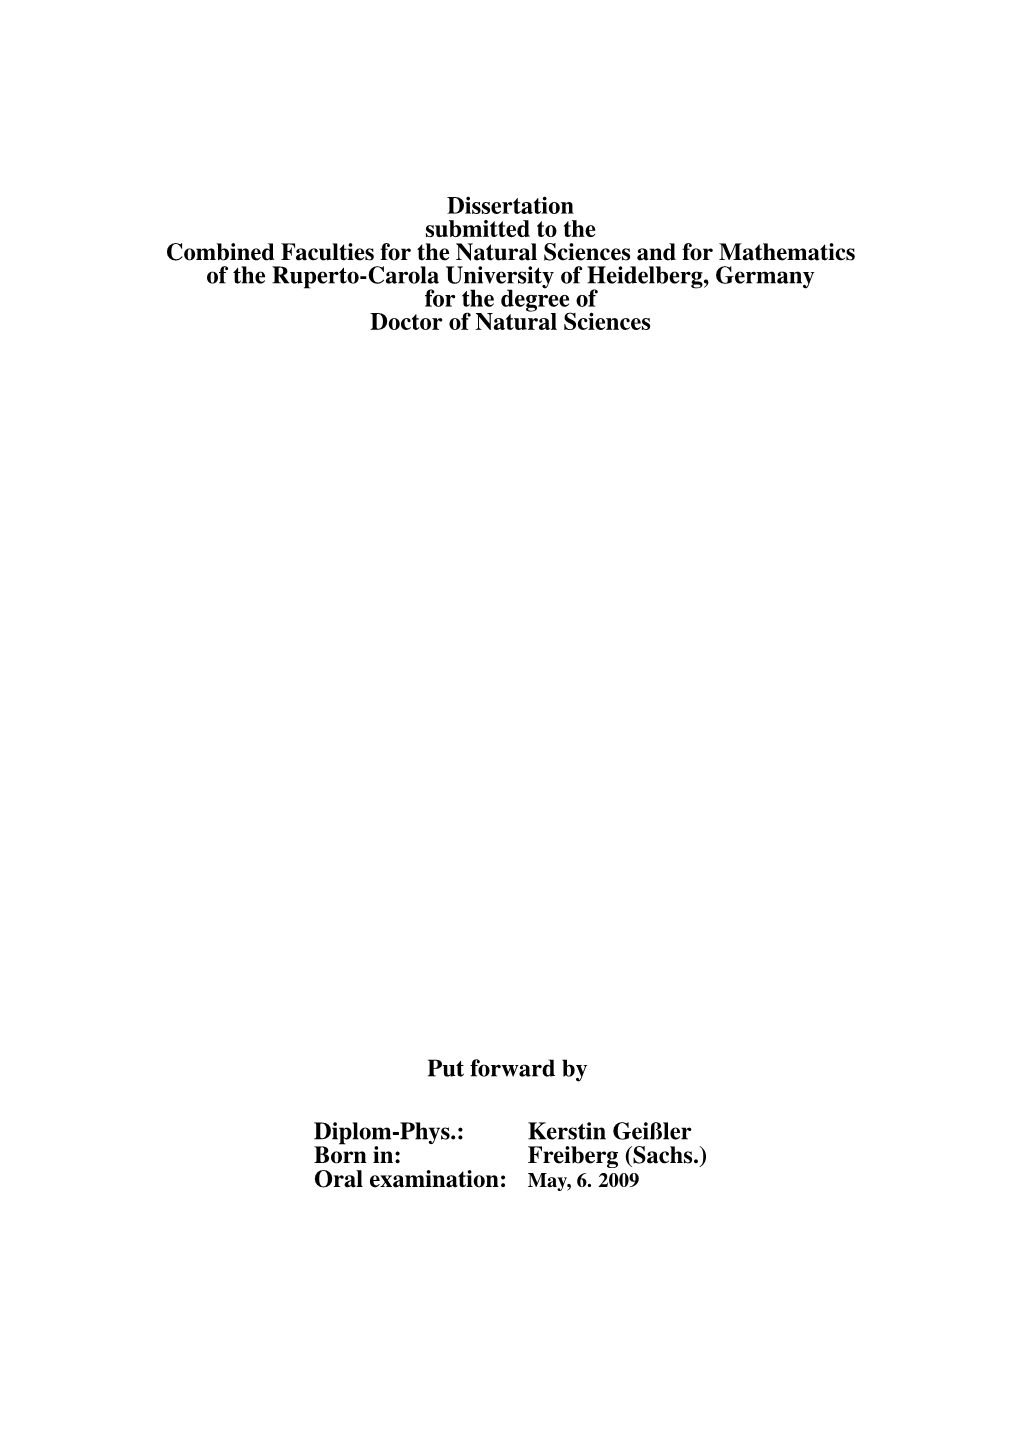 Dissertation Submitted to the Combined Faculties for the Natural Sciences and for Mathematics of the Ruperto-Carola University O